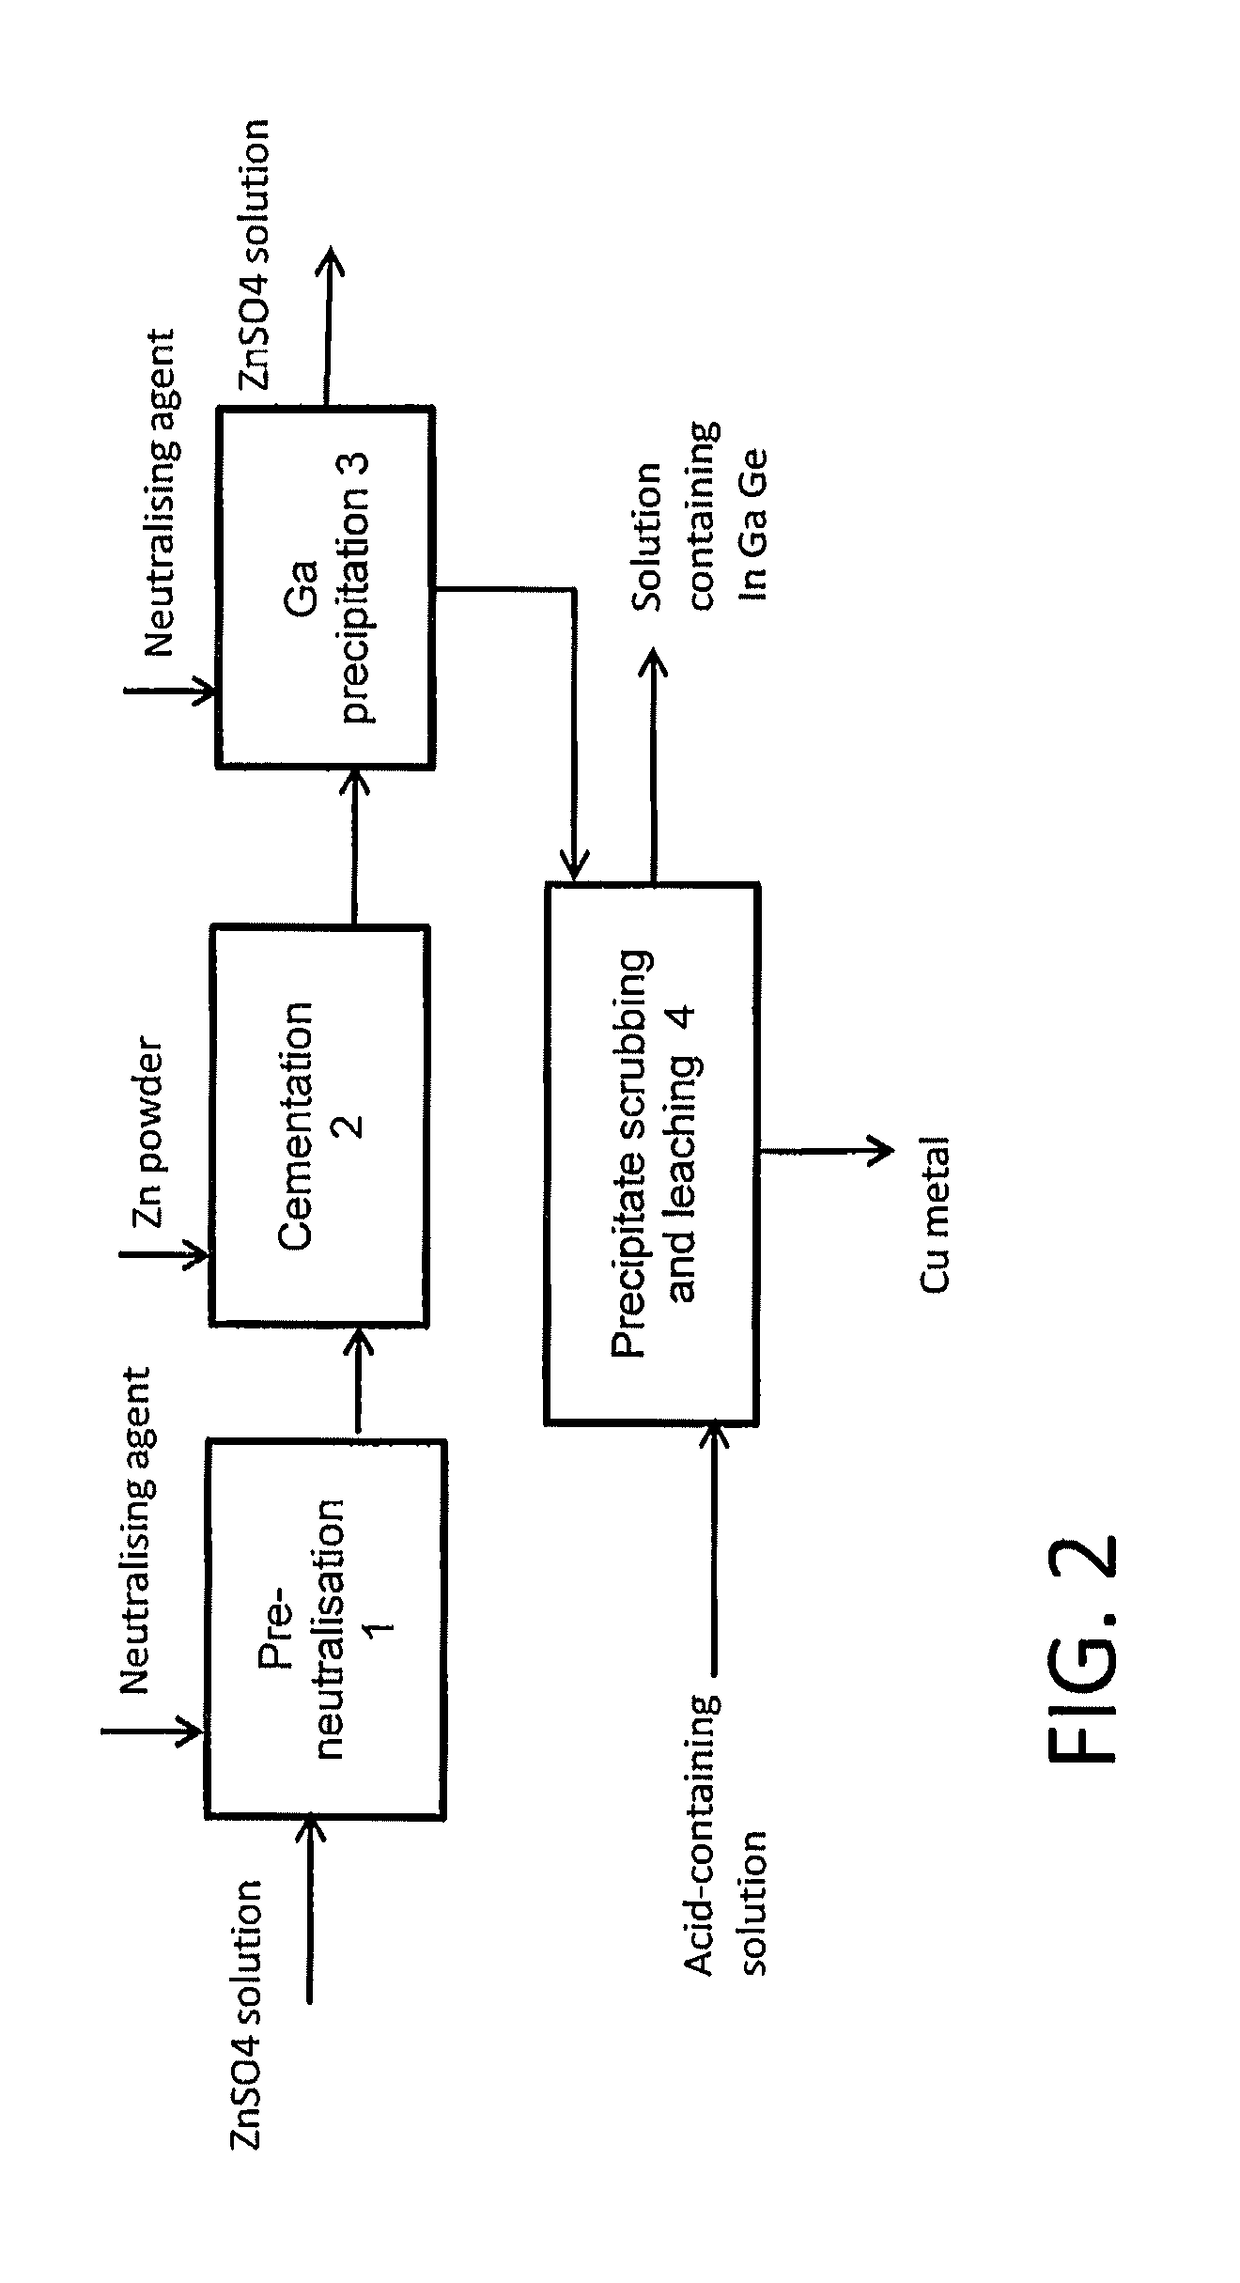 Method for treating a solution containing zinc sulphate